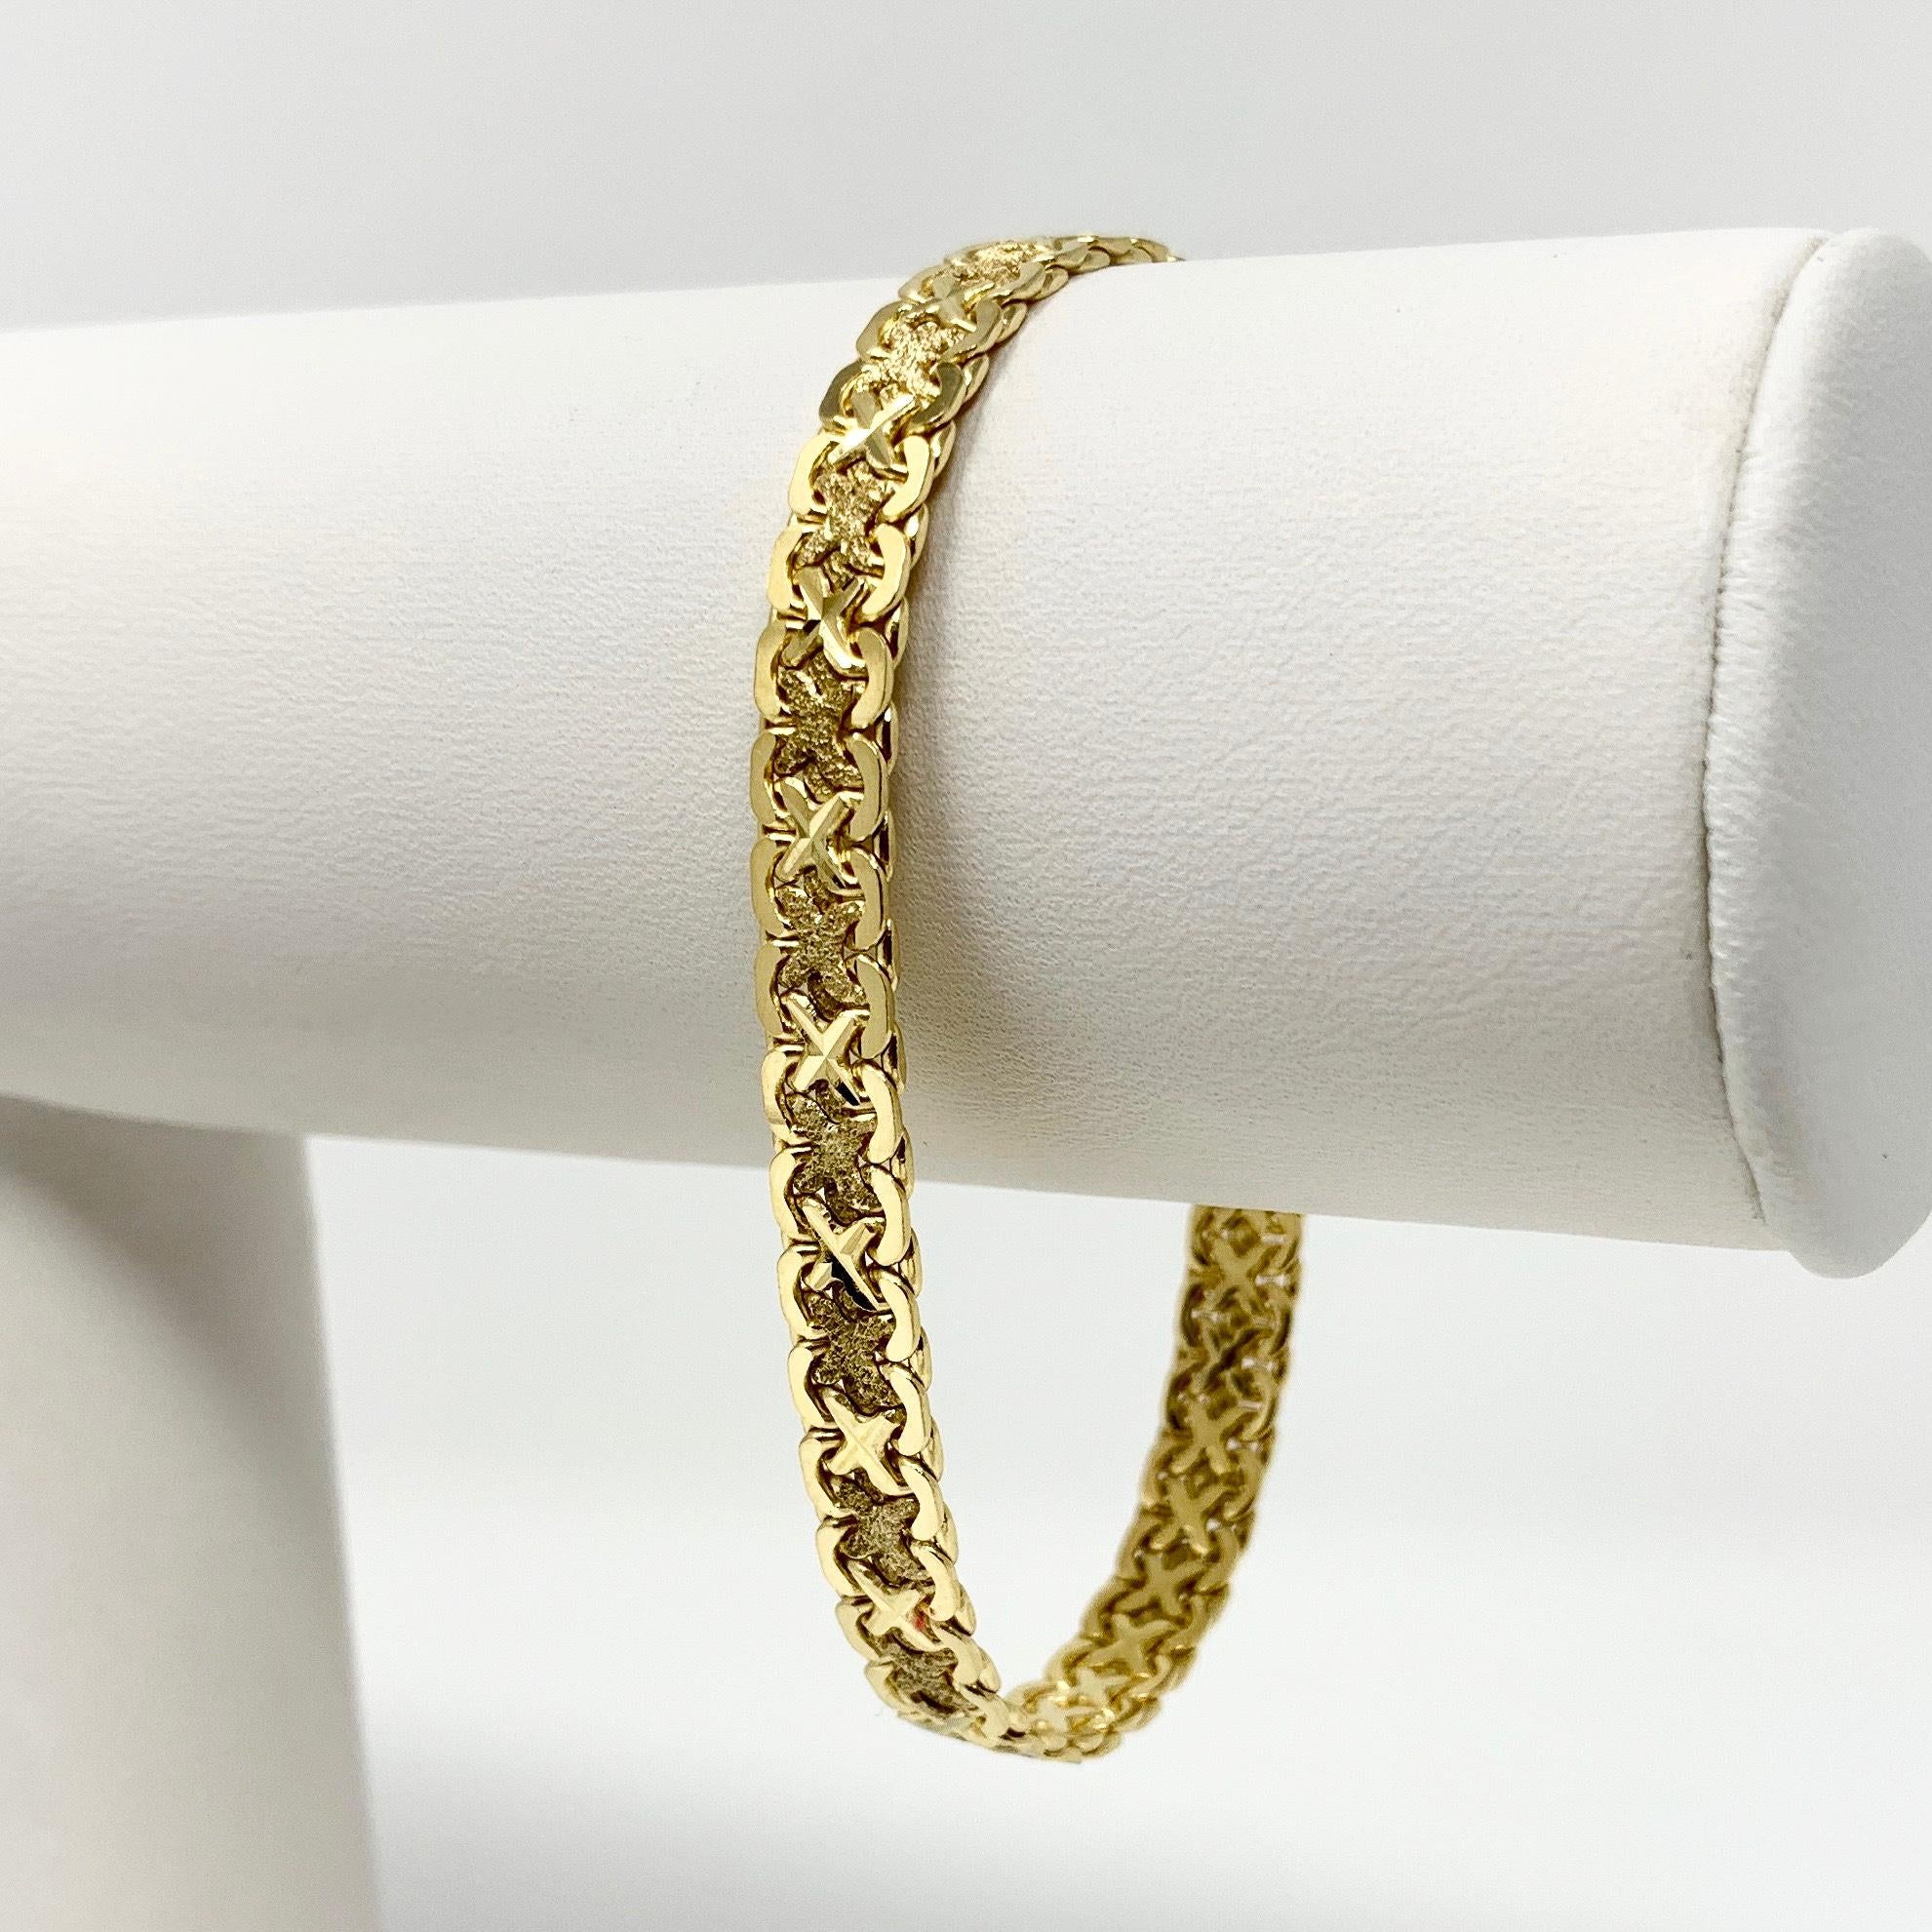 14k Fine Yellow Gold 13.8g Fancy Link 6mm Aurafin Bracelet Italy 7 Inches

Condition:  Excellent (Professionally Cleaned and Polished)
Metal:  14k Gold (Marked, and Professionally Tested)
Weight:  13.8g
Length:  7 Inches
Width:  6mm 
Closure:  Box